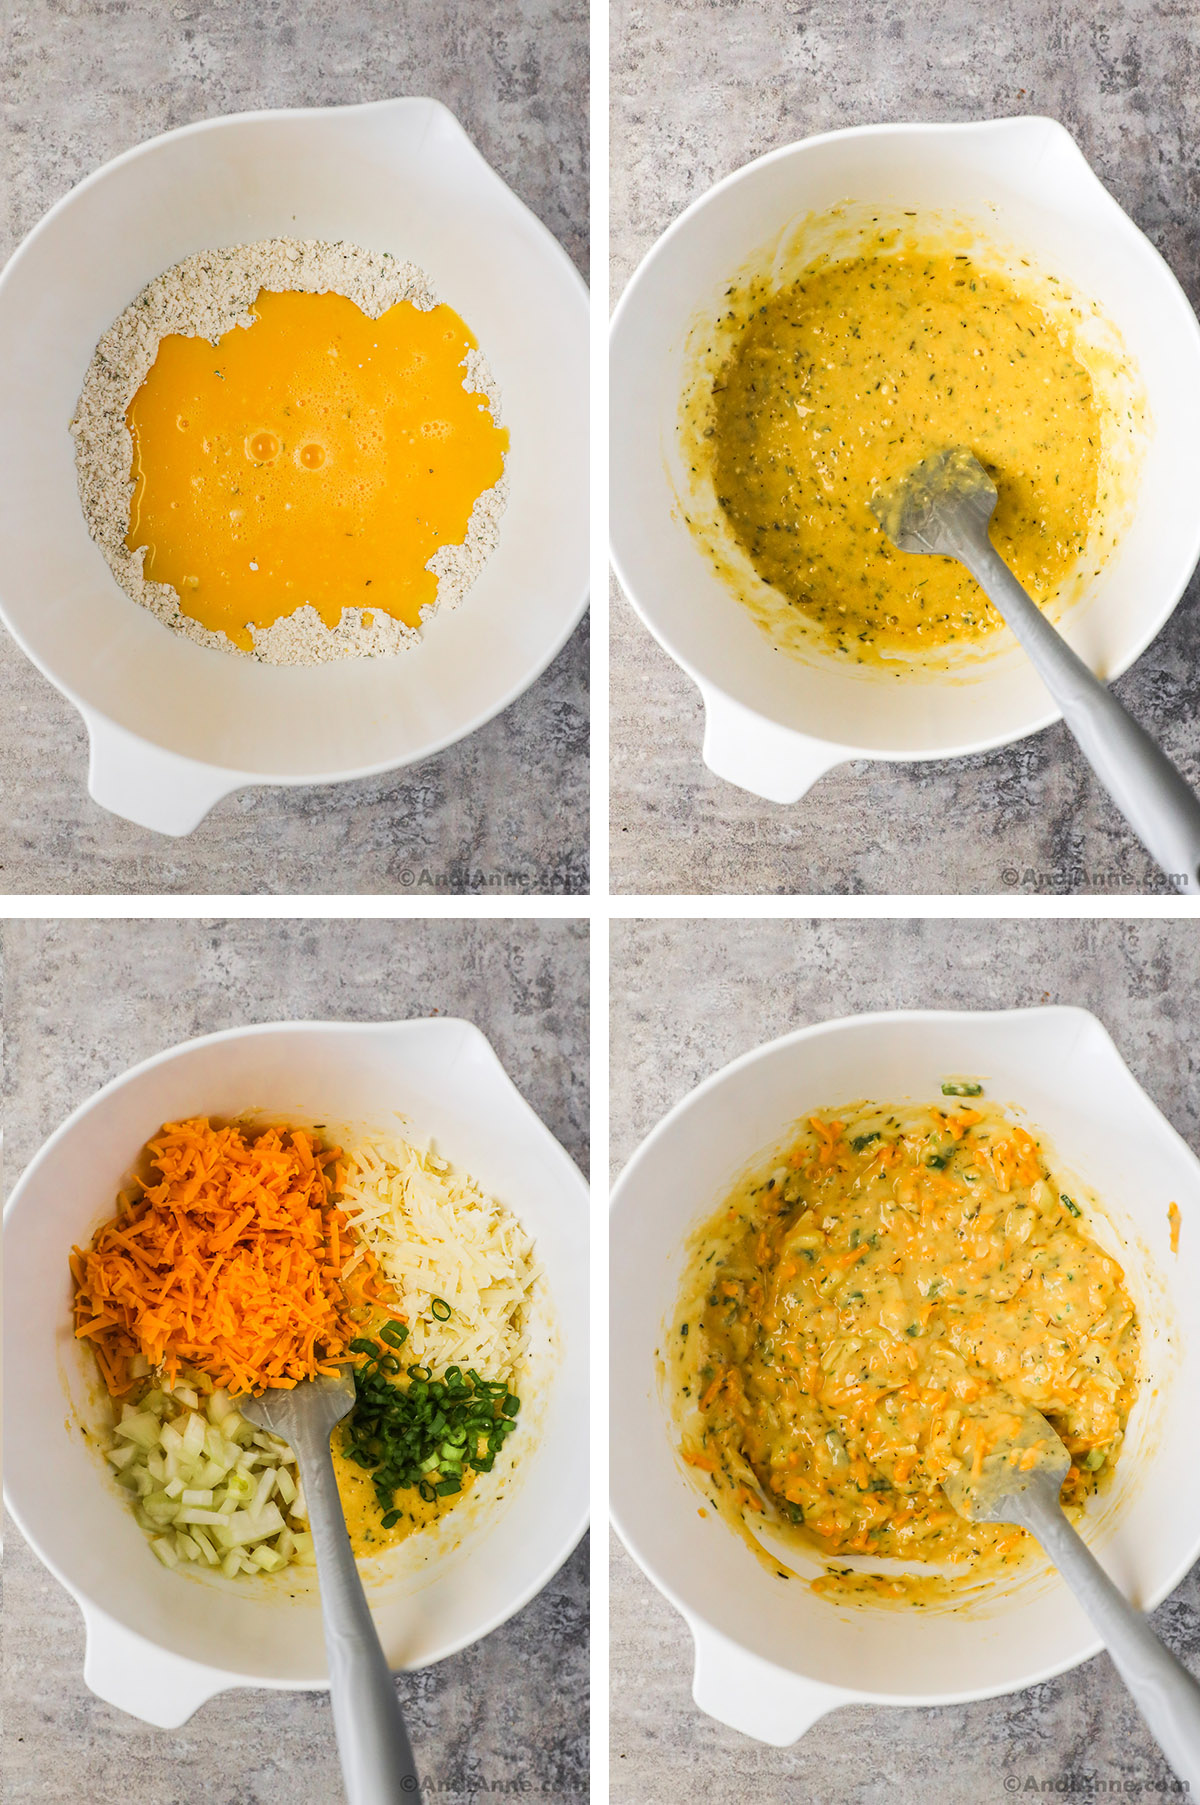 Four images, first is bowl with dry ingredients and wet ingredients on top. Second is yellow batter with spatula. Third is shredded cheddar and parmesan cheese, chopped onion and green onion dumped over batter with spatula. Fourth image is all ingredients mixed together.